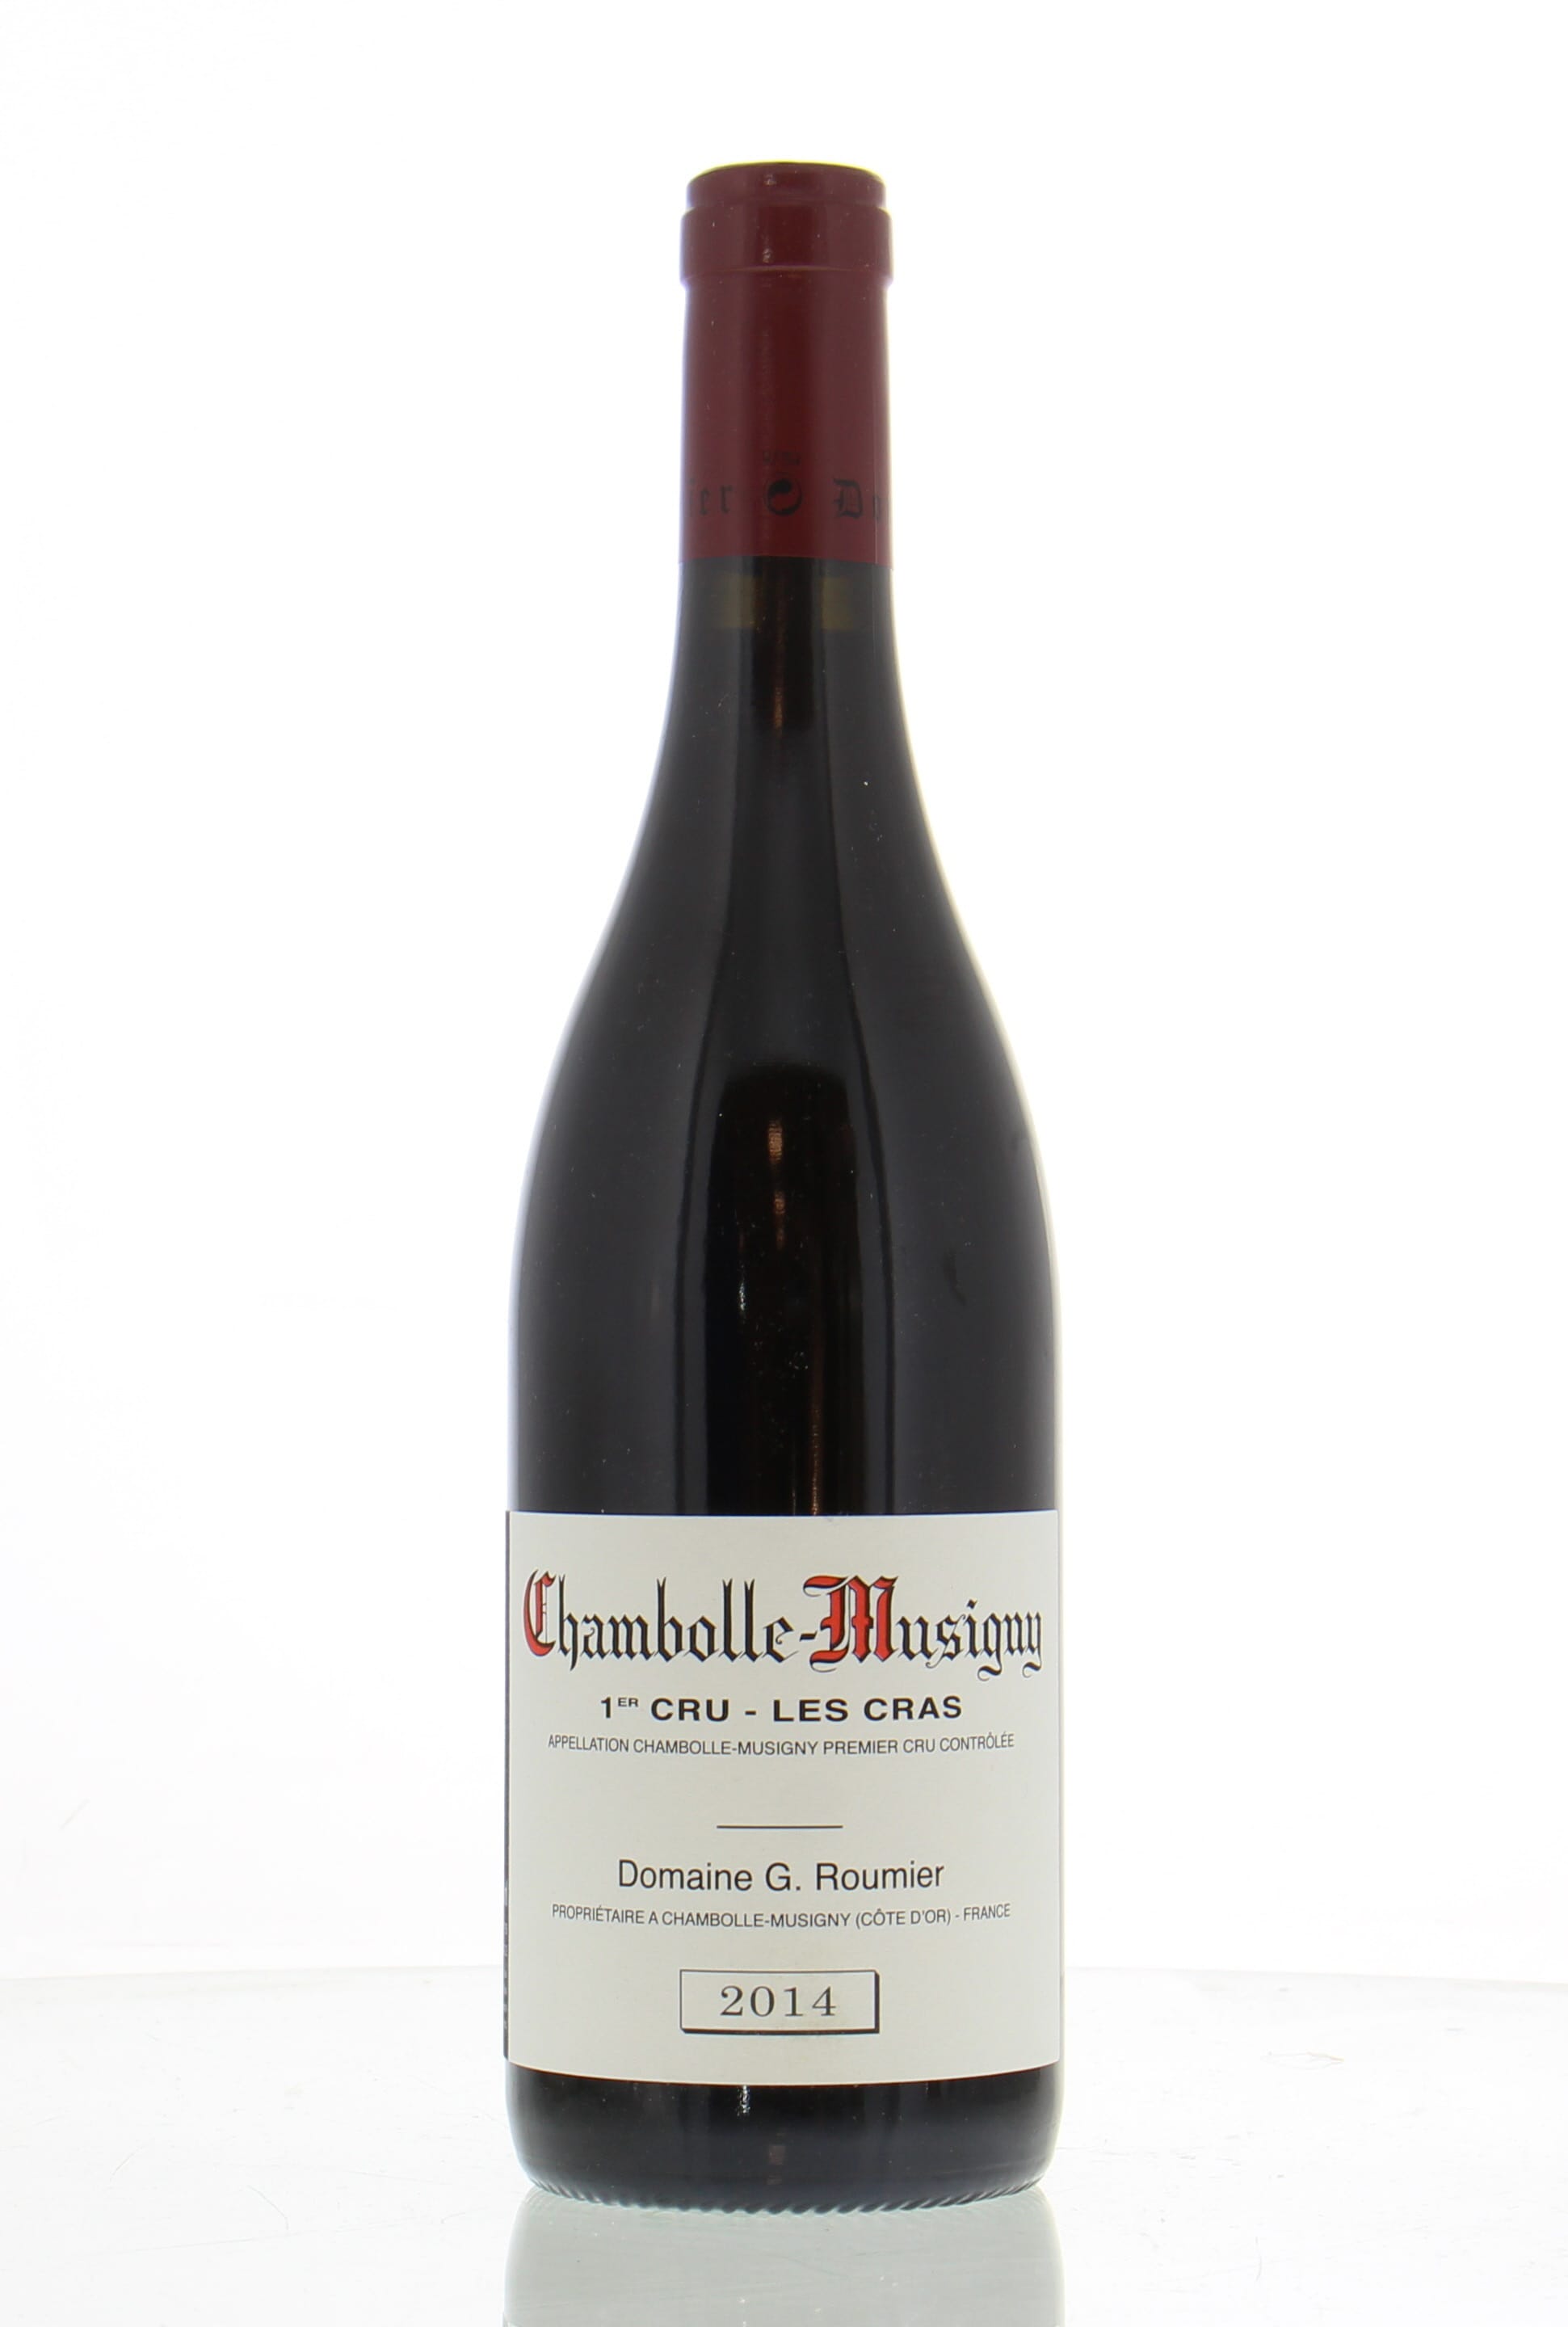 Georges Roumier - Chambolle Musigny les Cras 1cru 2014